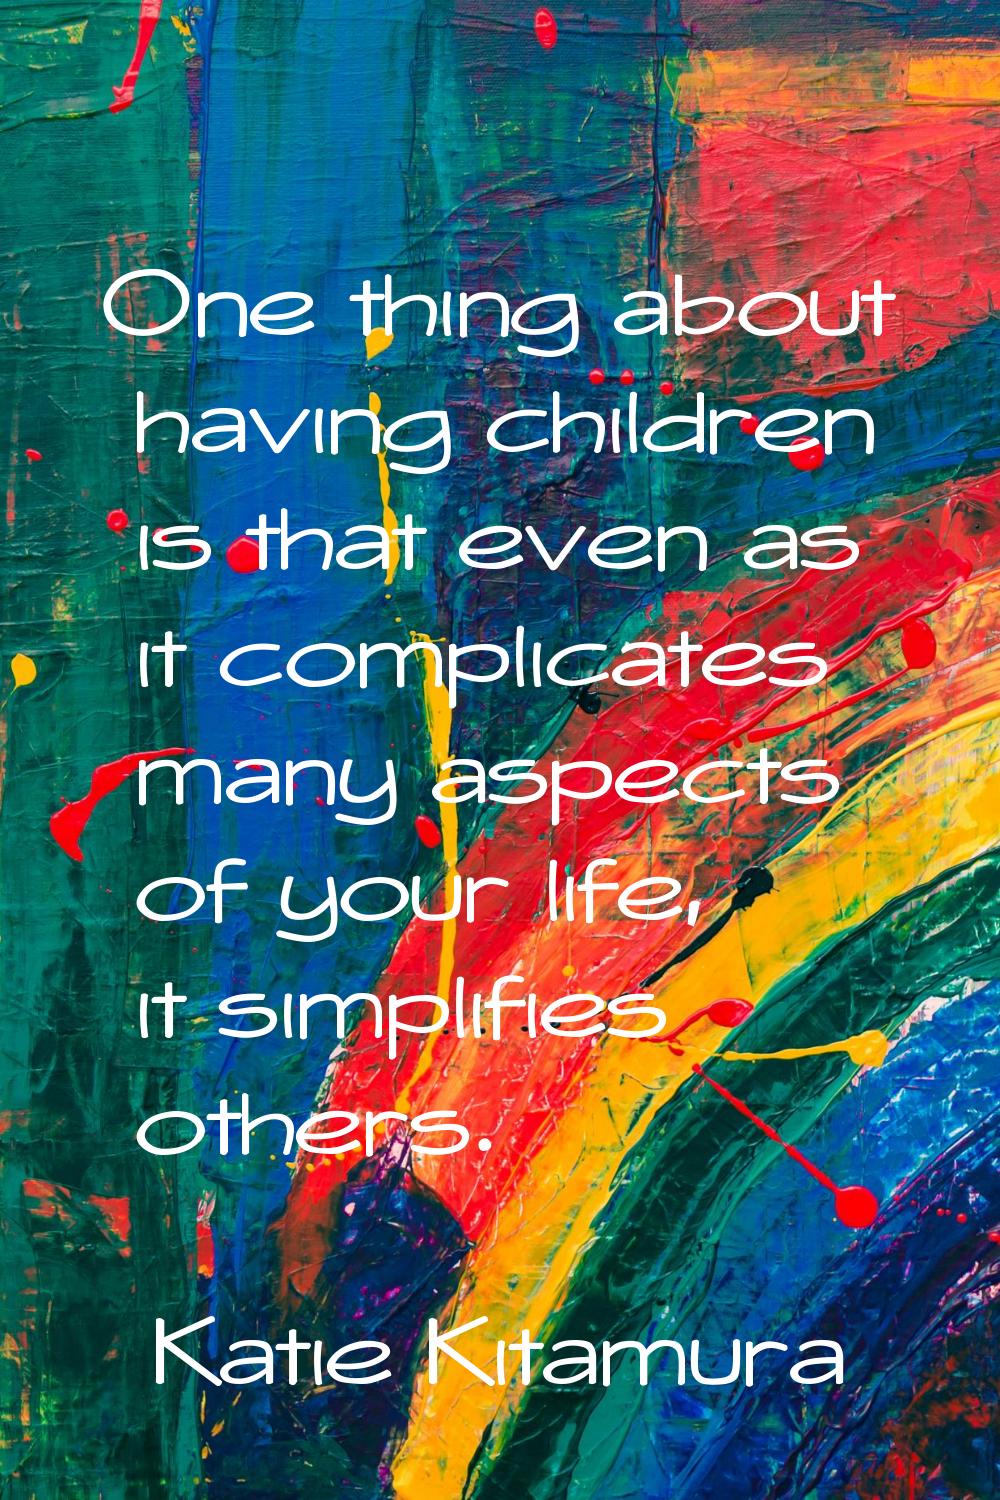 One thing about having children is that even as it complicates many aspects of your life, it simpli